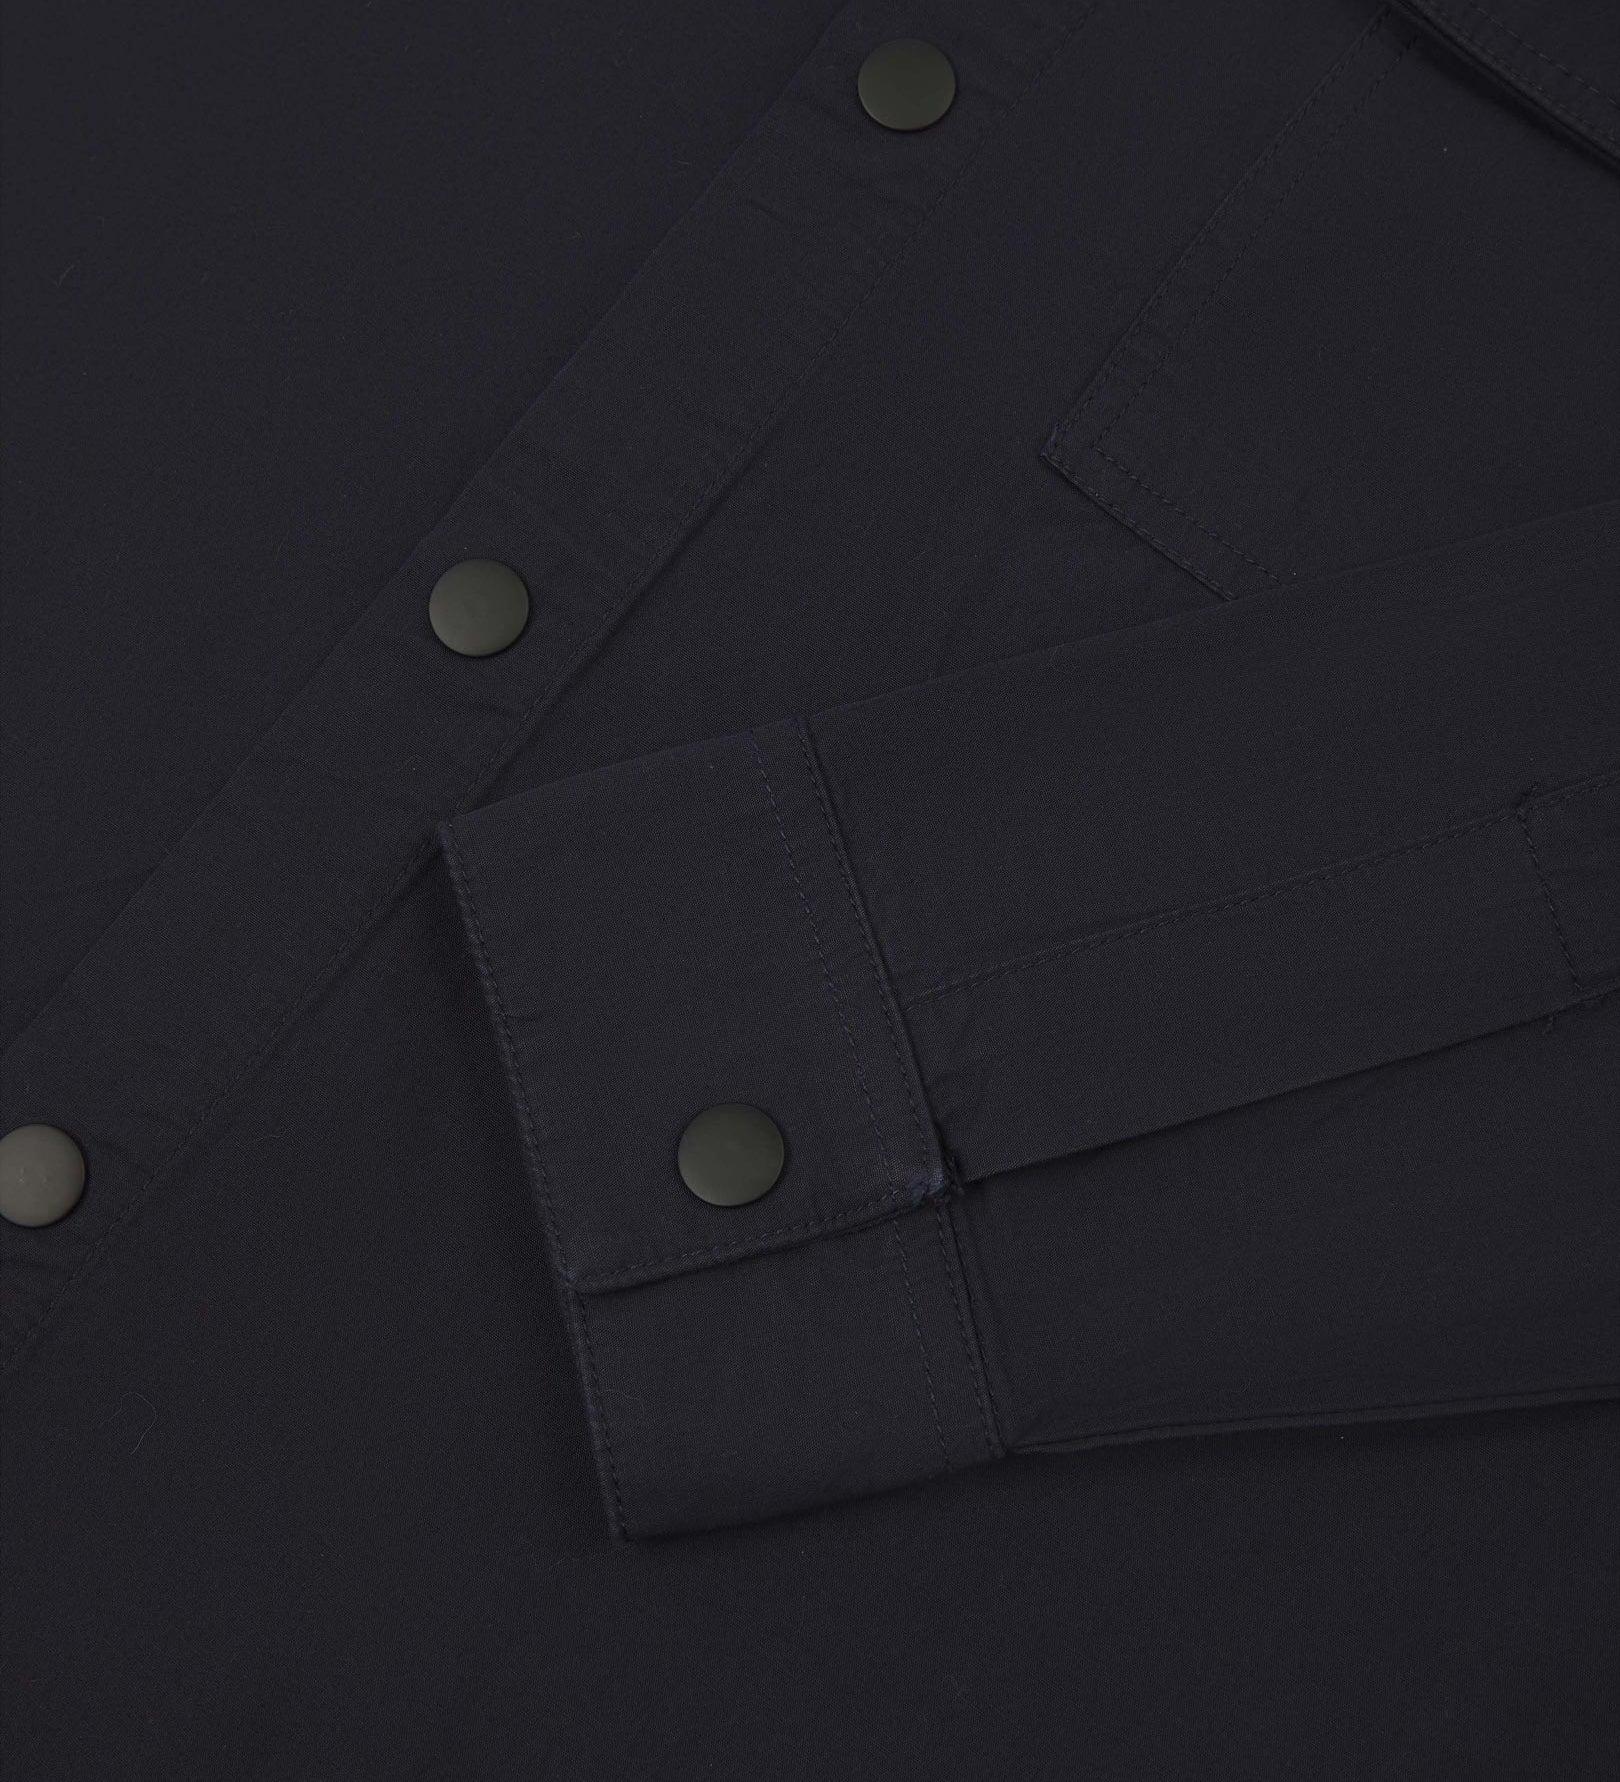 View of the mid-section of the midnight blue 6001 lightweight overshirt from Uskees, with focus on the popper buttons and reinforced cuff, placket and sleeve.